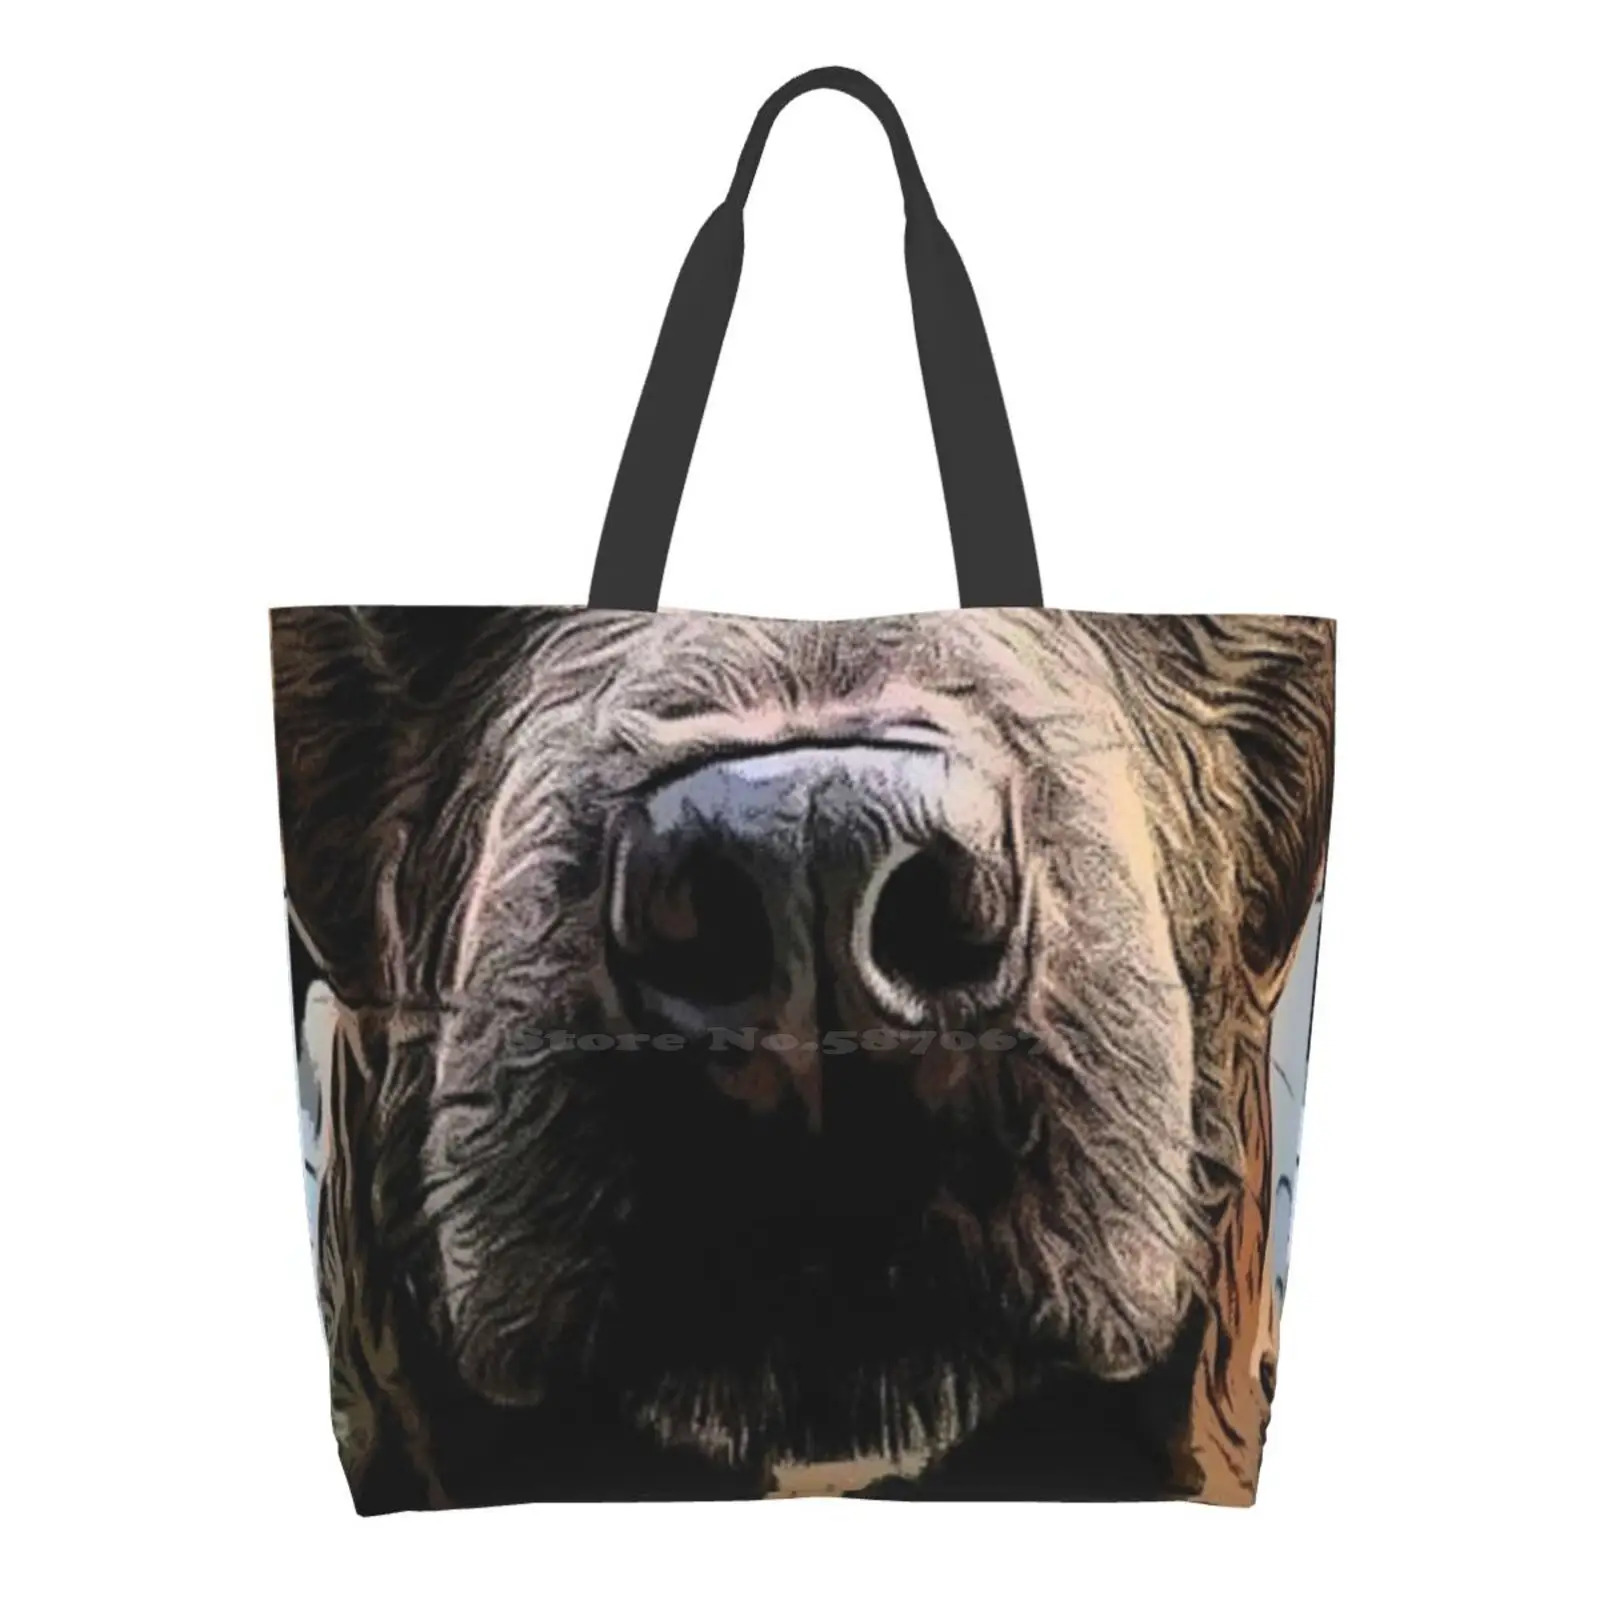 

Staf Shire Bull Terrier Mouth Shopping Bags Girls Fashion Casual Pacakge Hand Bag Cute Animal Favorite Animal Funny Funny